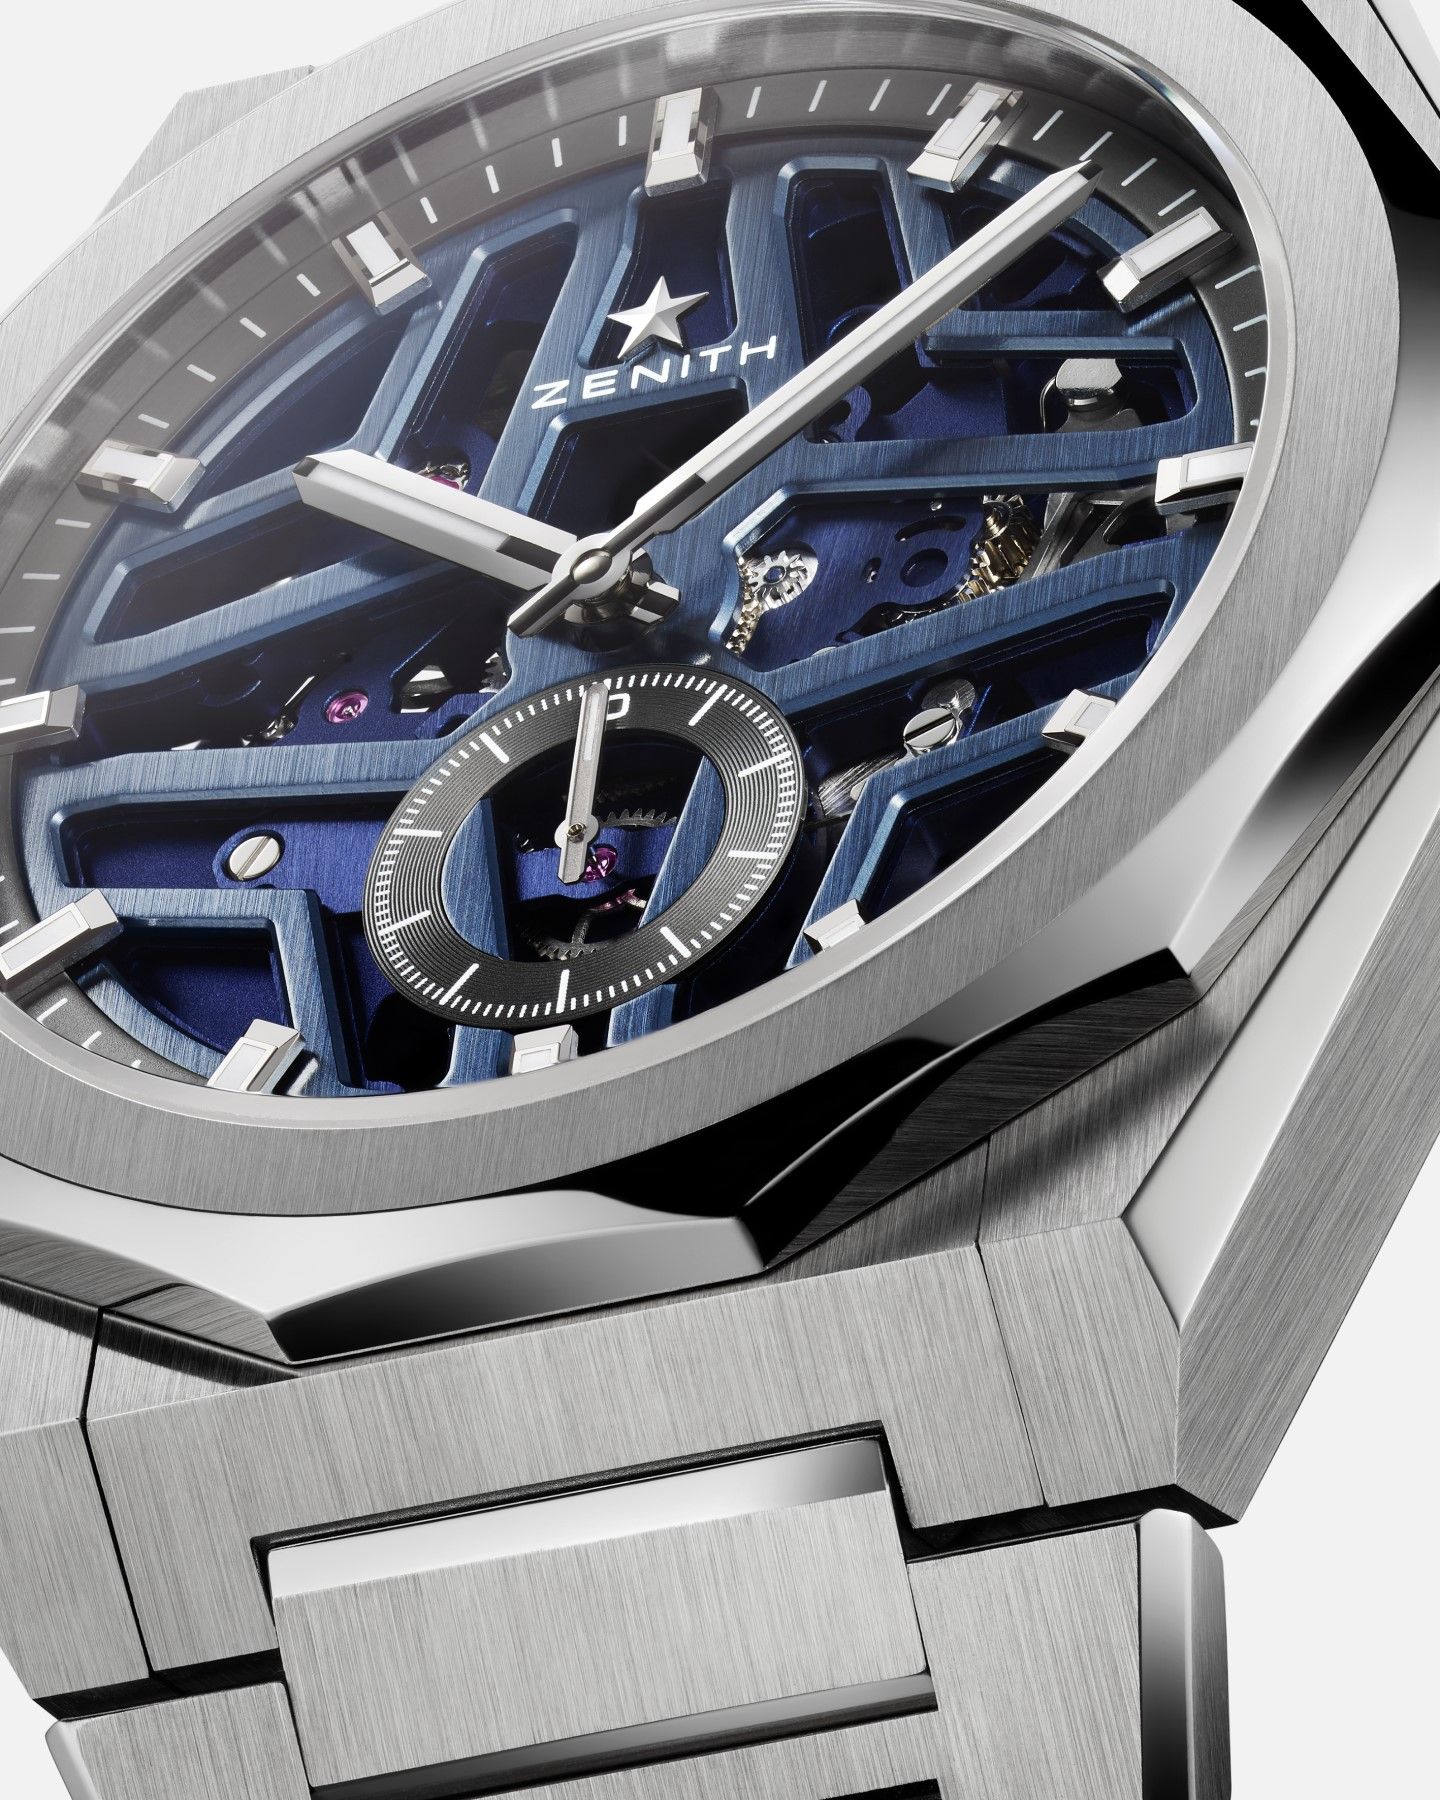 LVMH Watch Week 2023: Zenith Unveils The Most Elaborate Skeleton Watch To Date